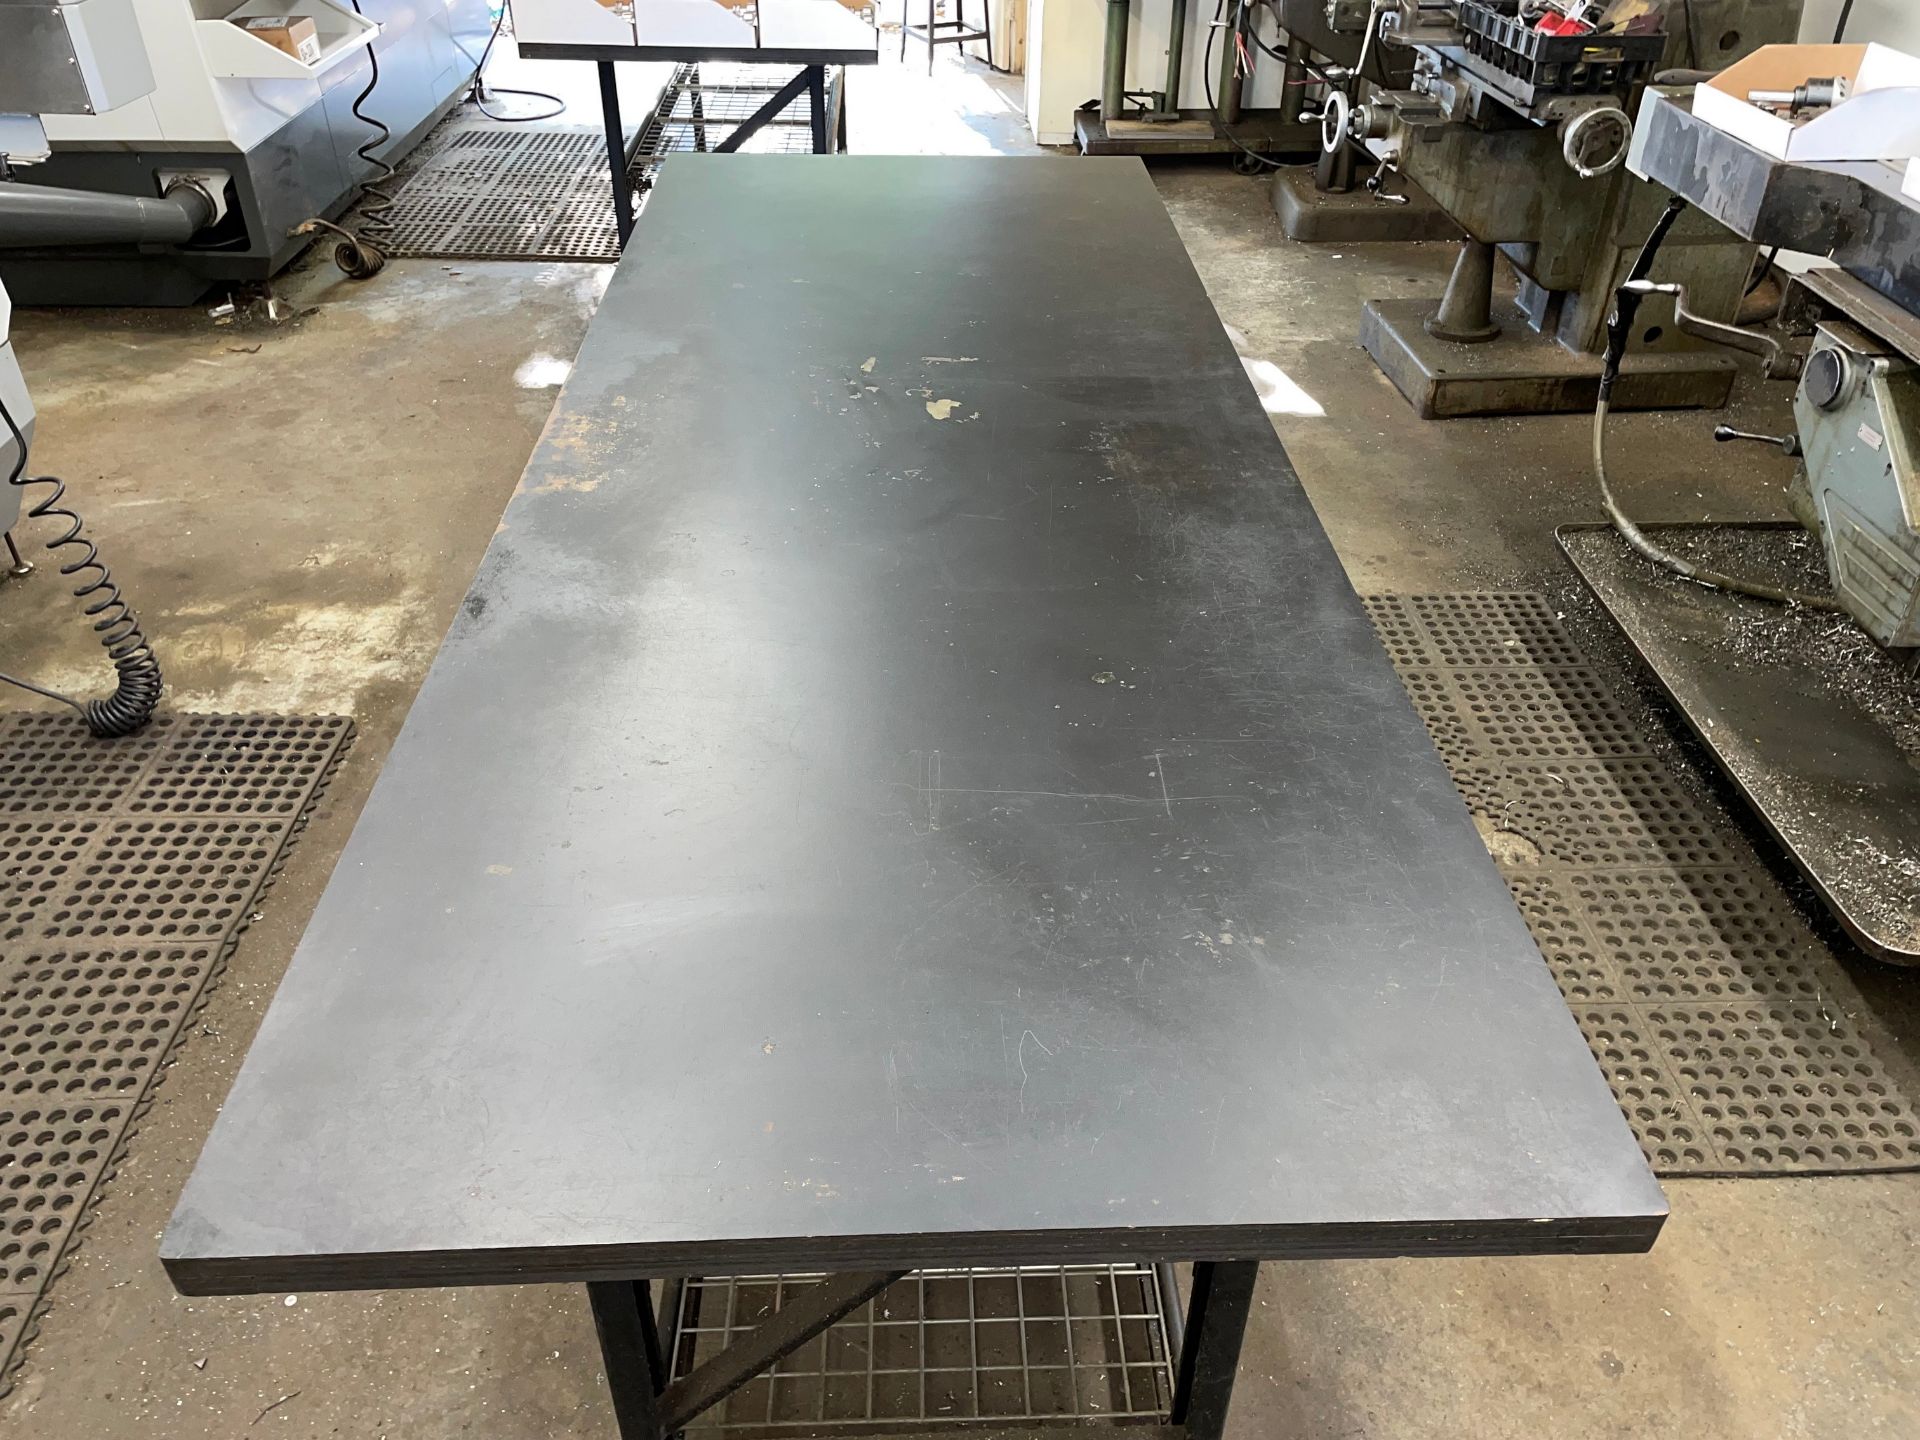 Steel Frame Table 96"L x 36"W with Shelves - Image 4 of 4